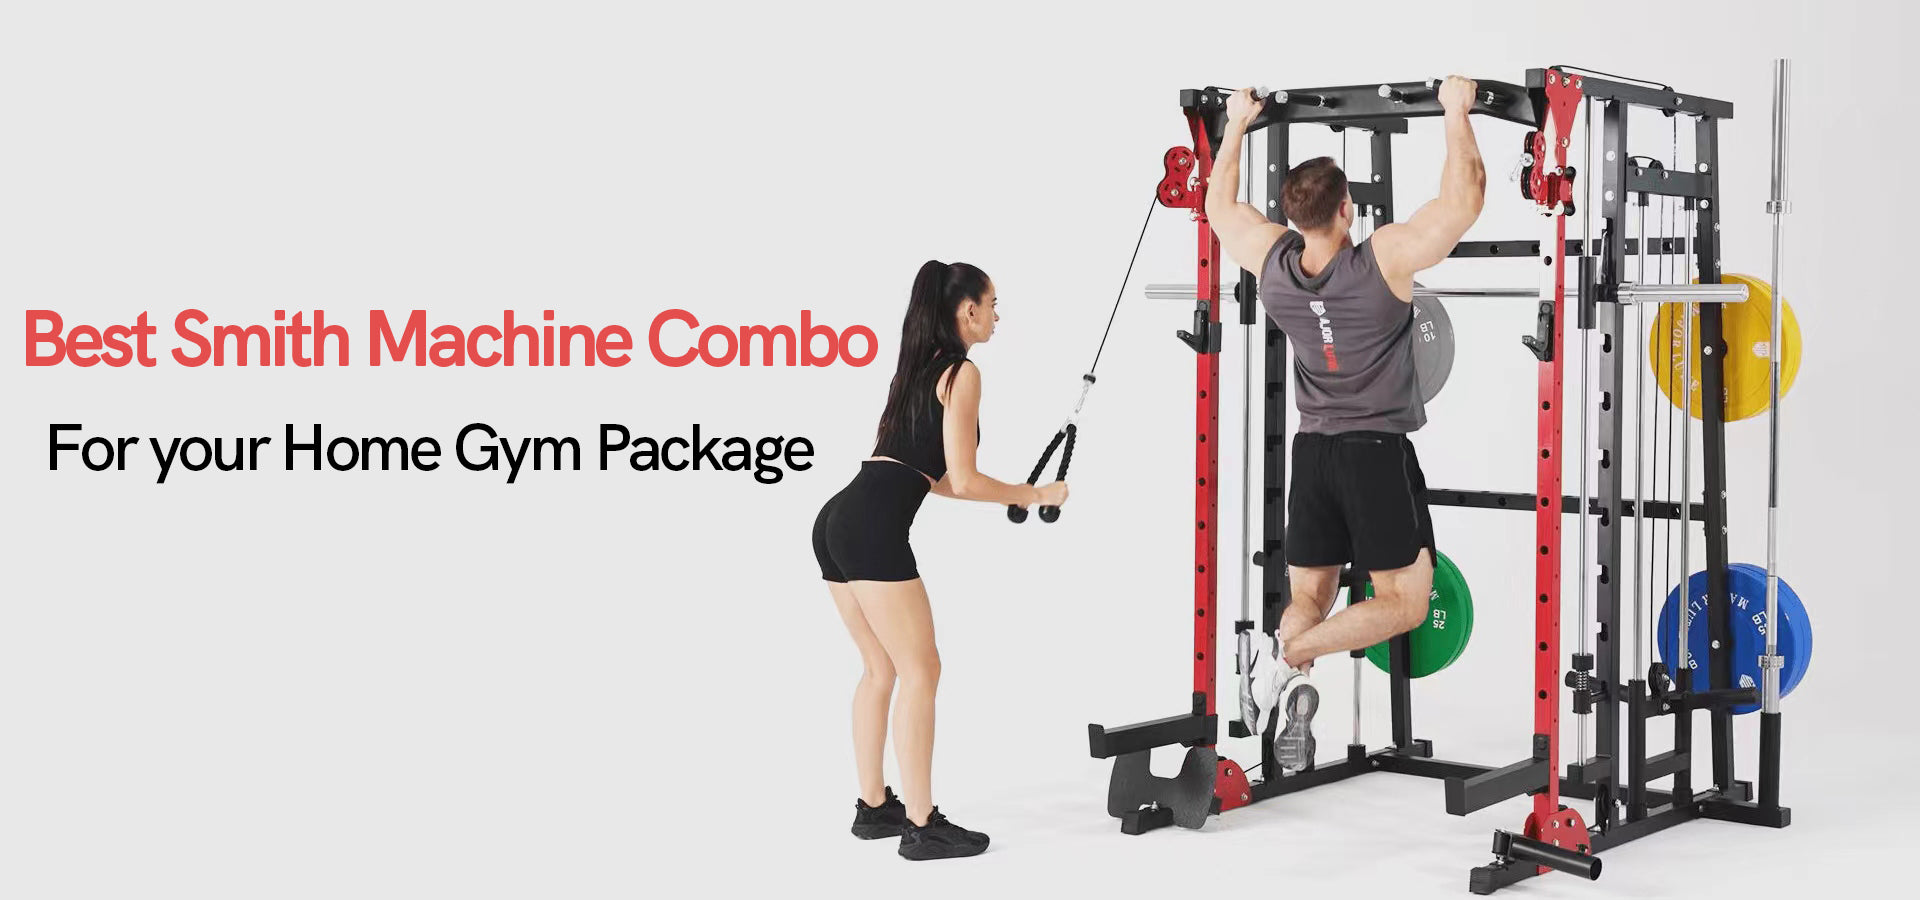 Best Smith Machine Combo For your Home Gym Package